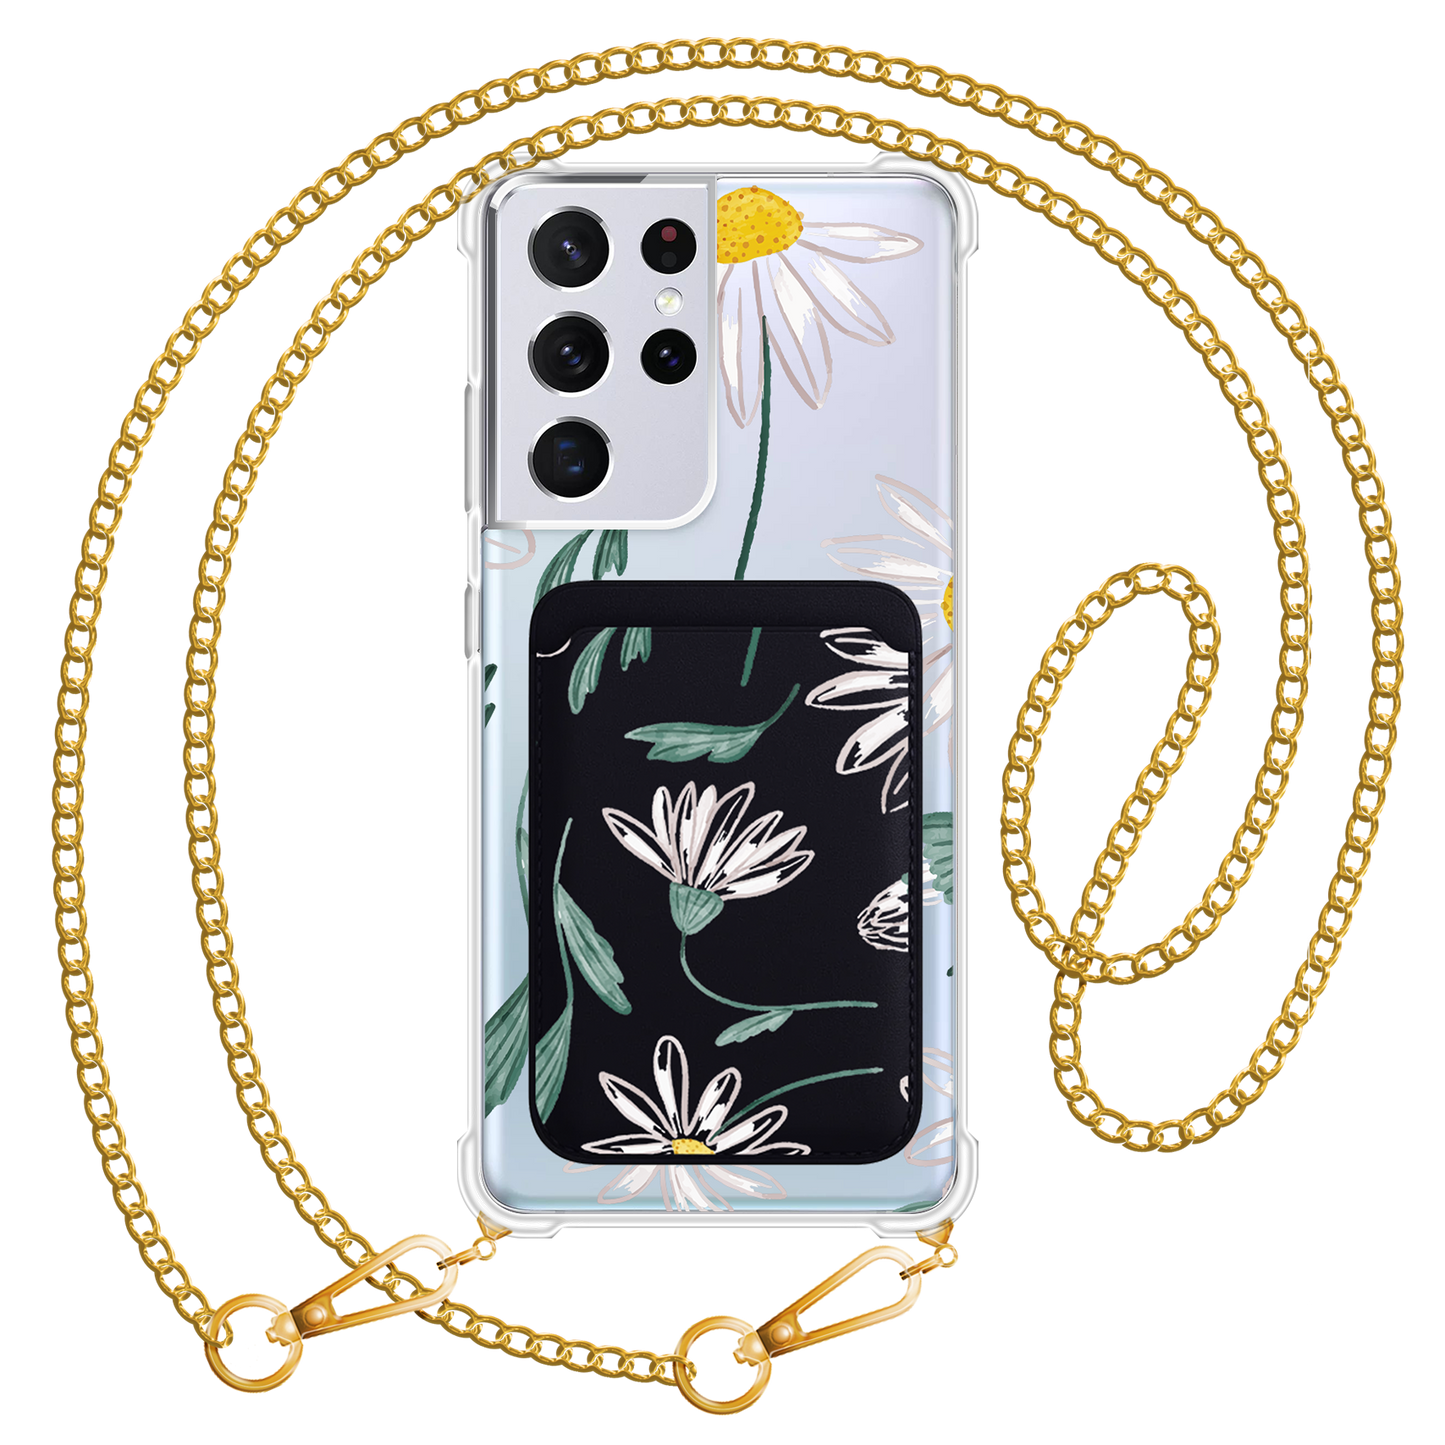 Android Magnetic Wallet Case - April Daisy